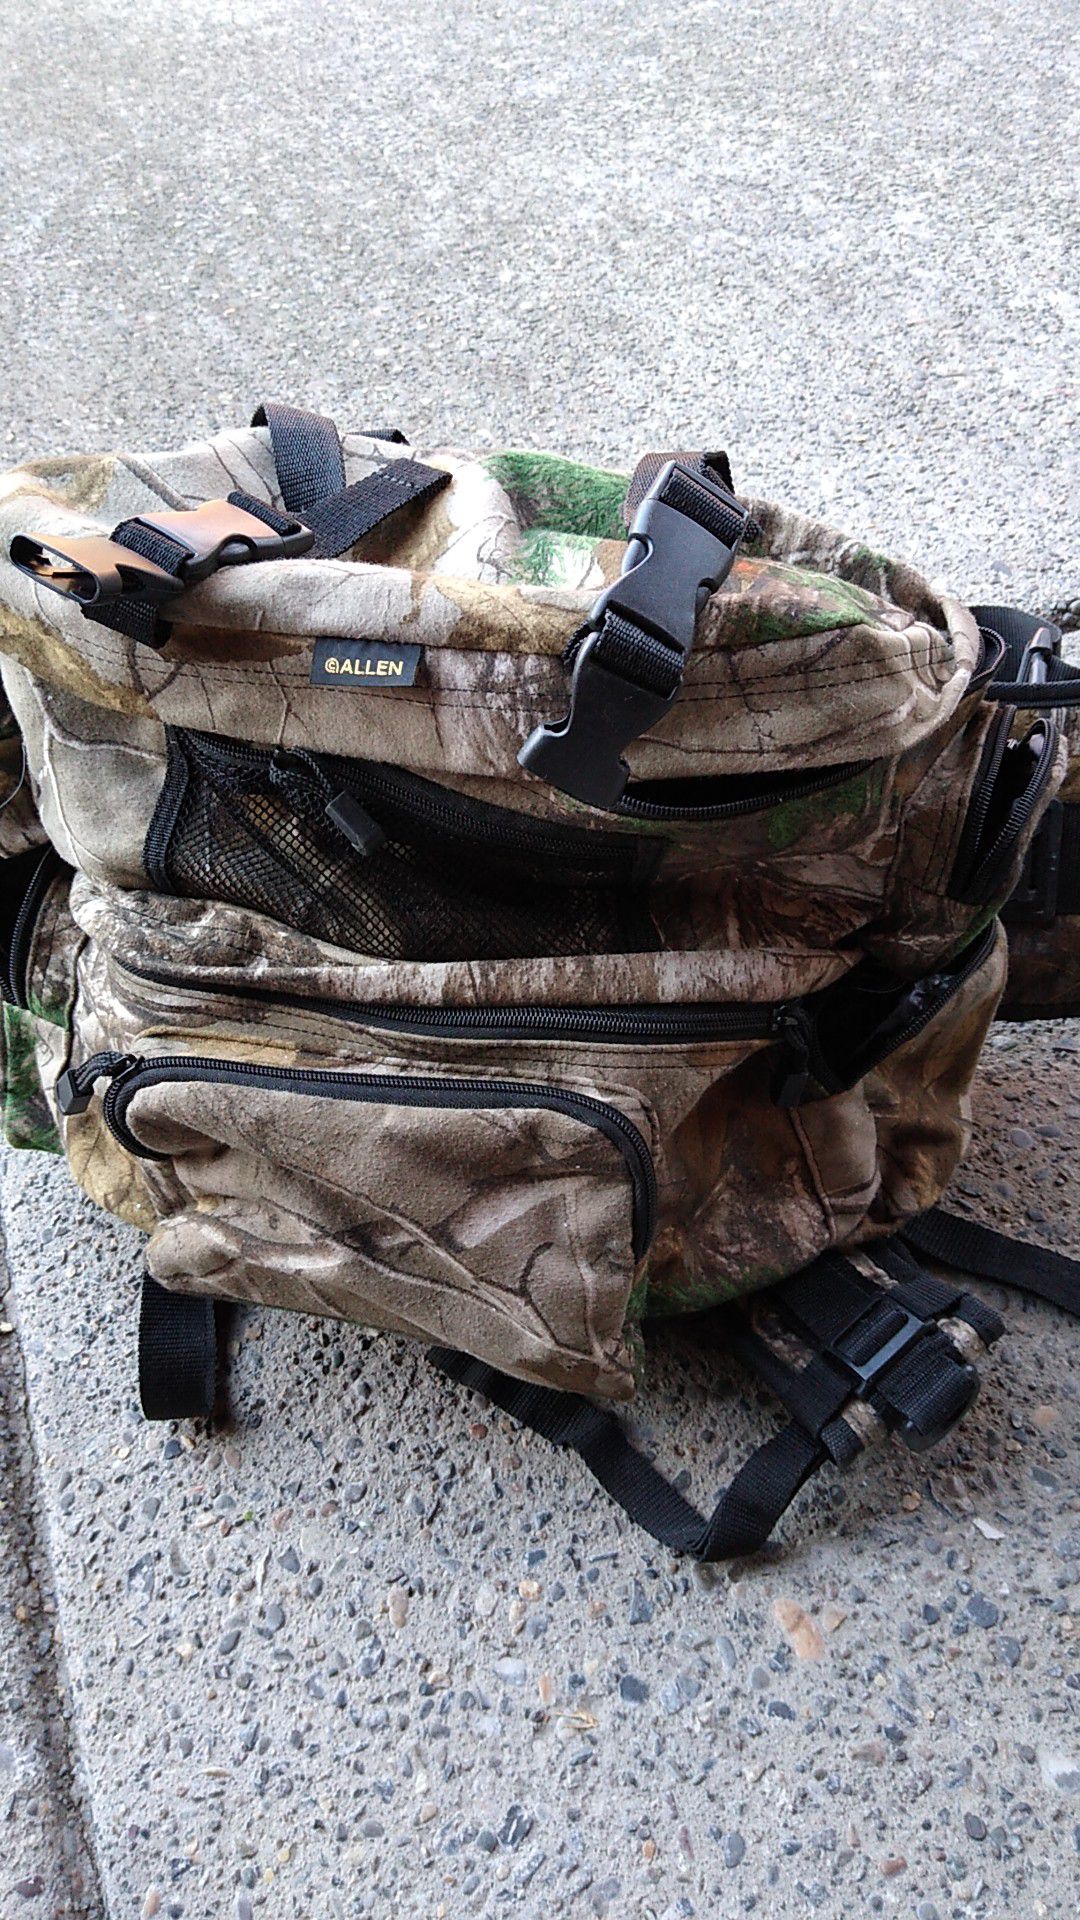 Allen fishing or hunting back pack